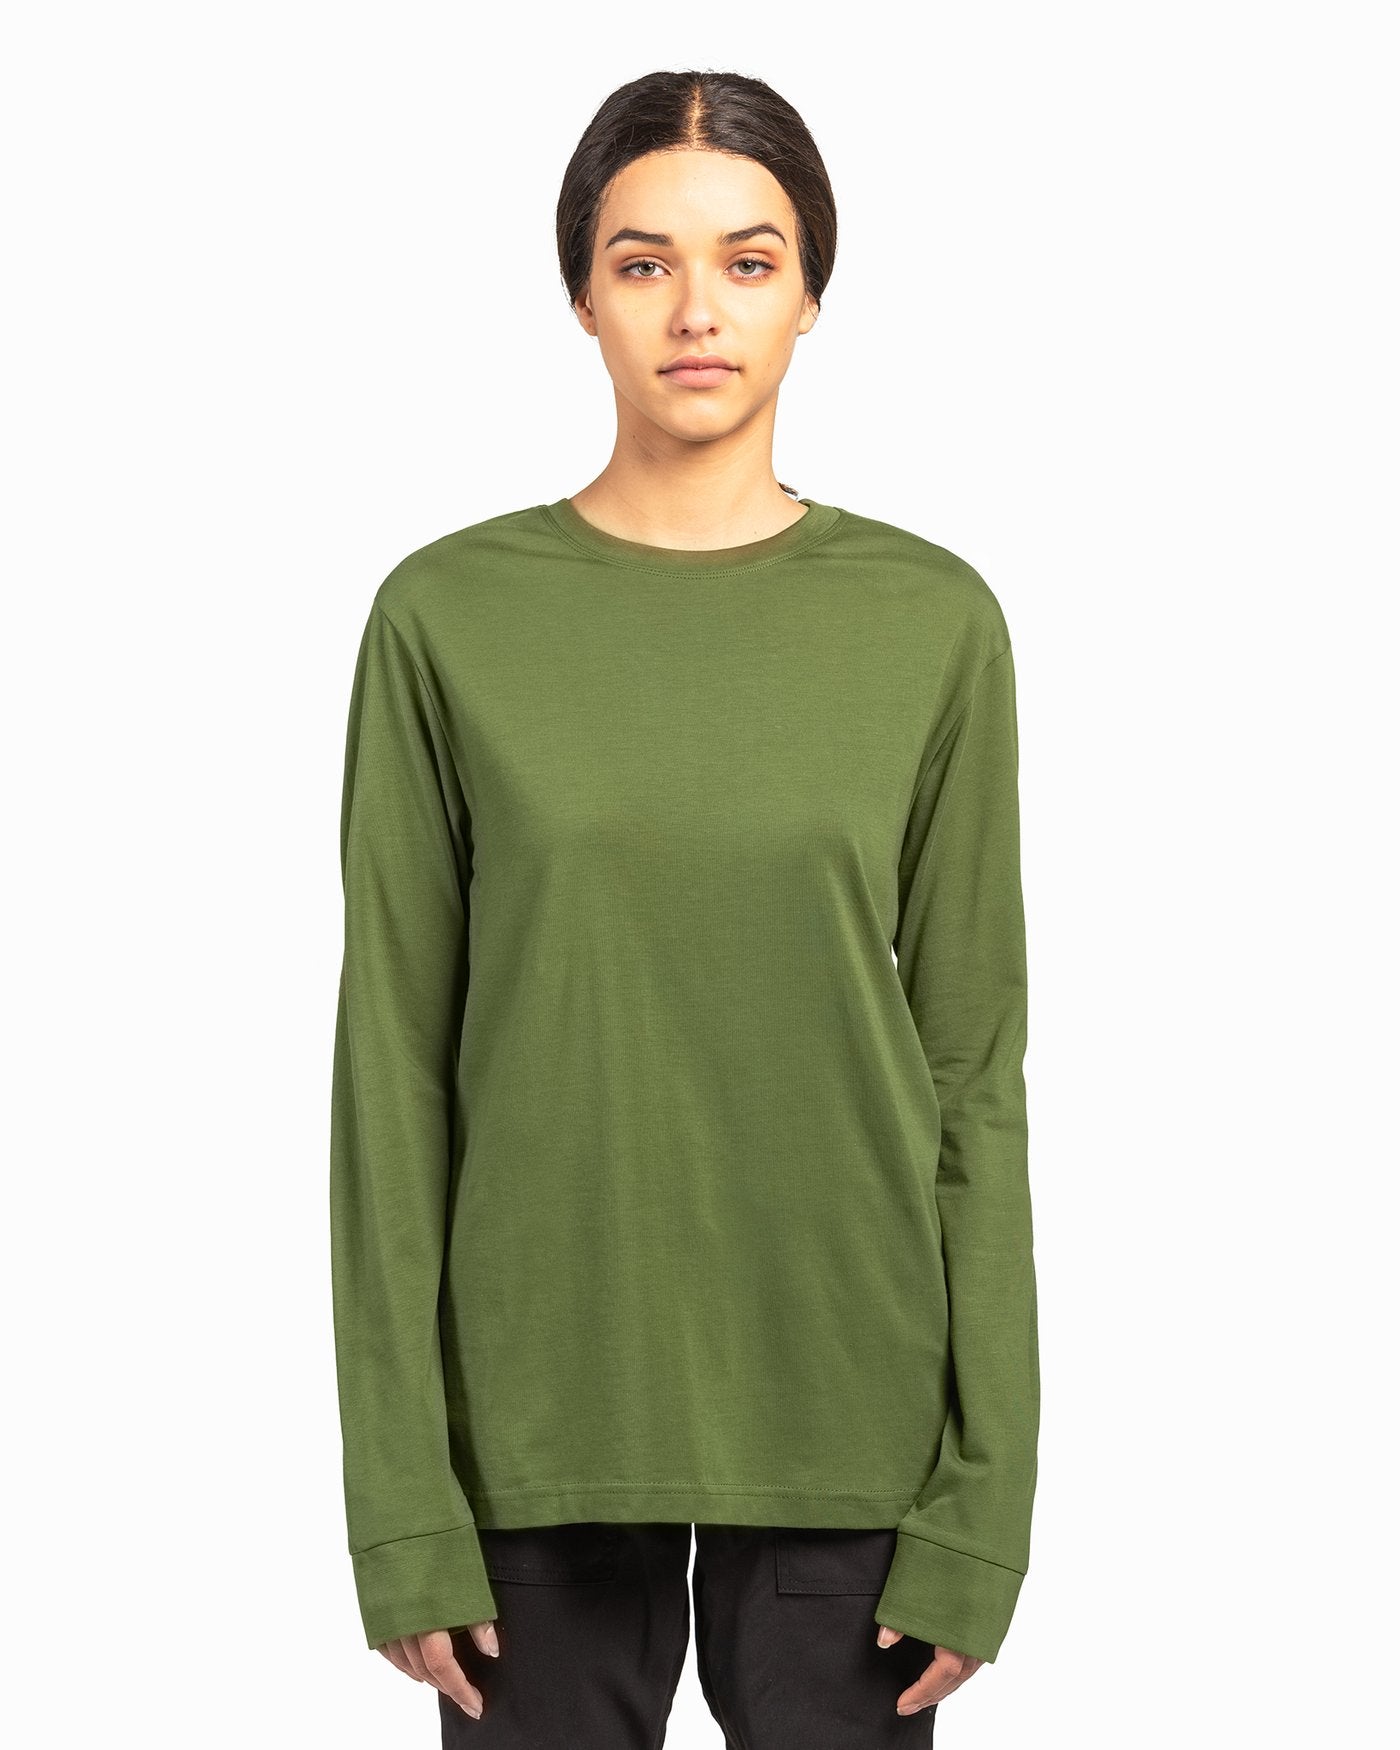 Olive Green American Grown Soft Supima® Cotton Men's Long Sleeve